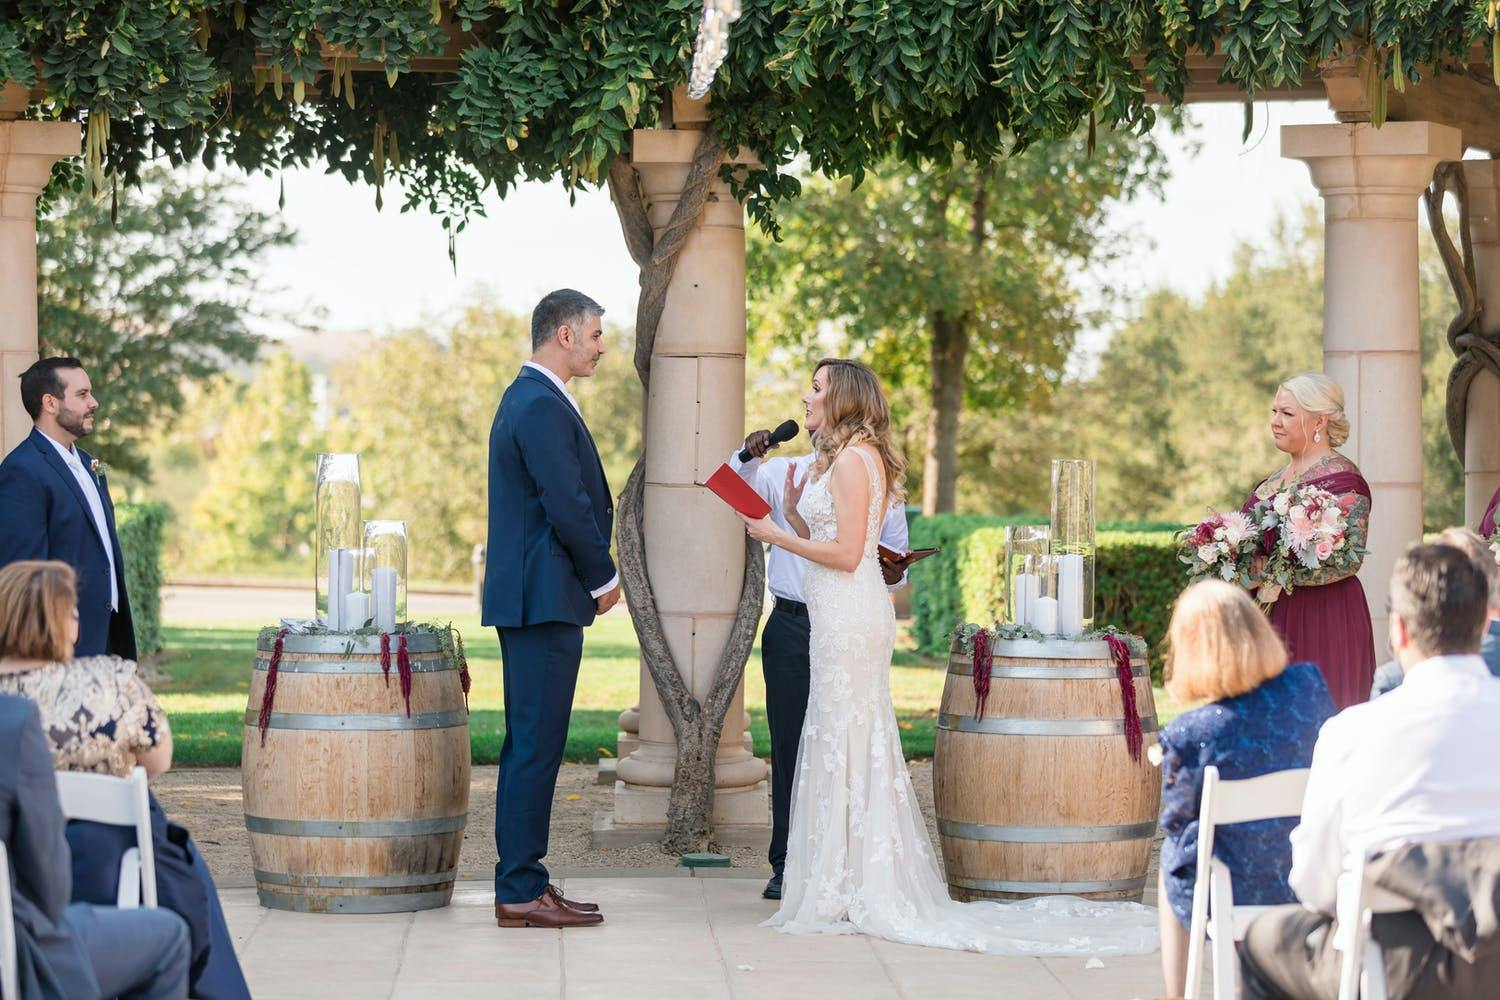 Rustic outdoor wedding ceremony with two barrels lining altar | PartySlate